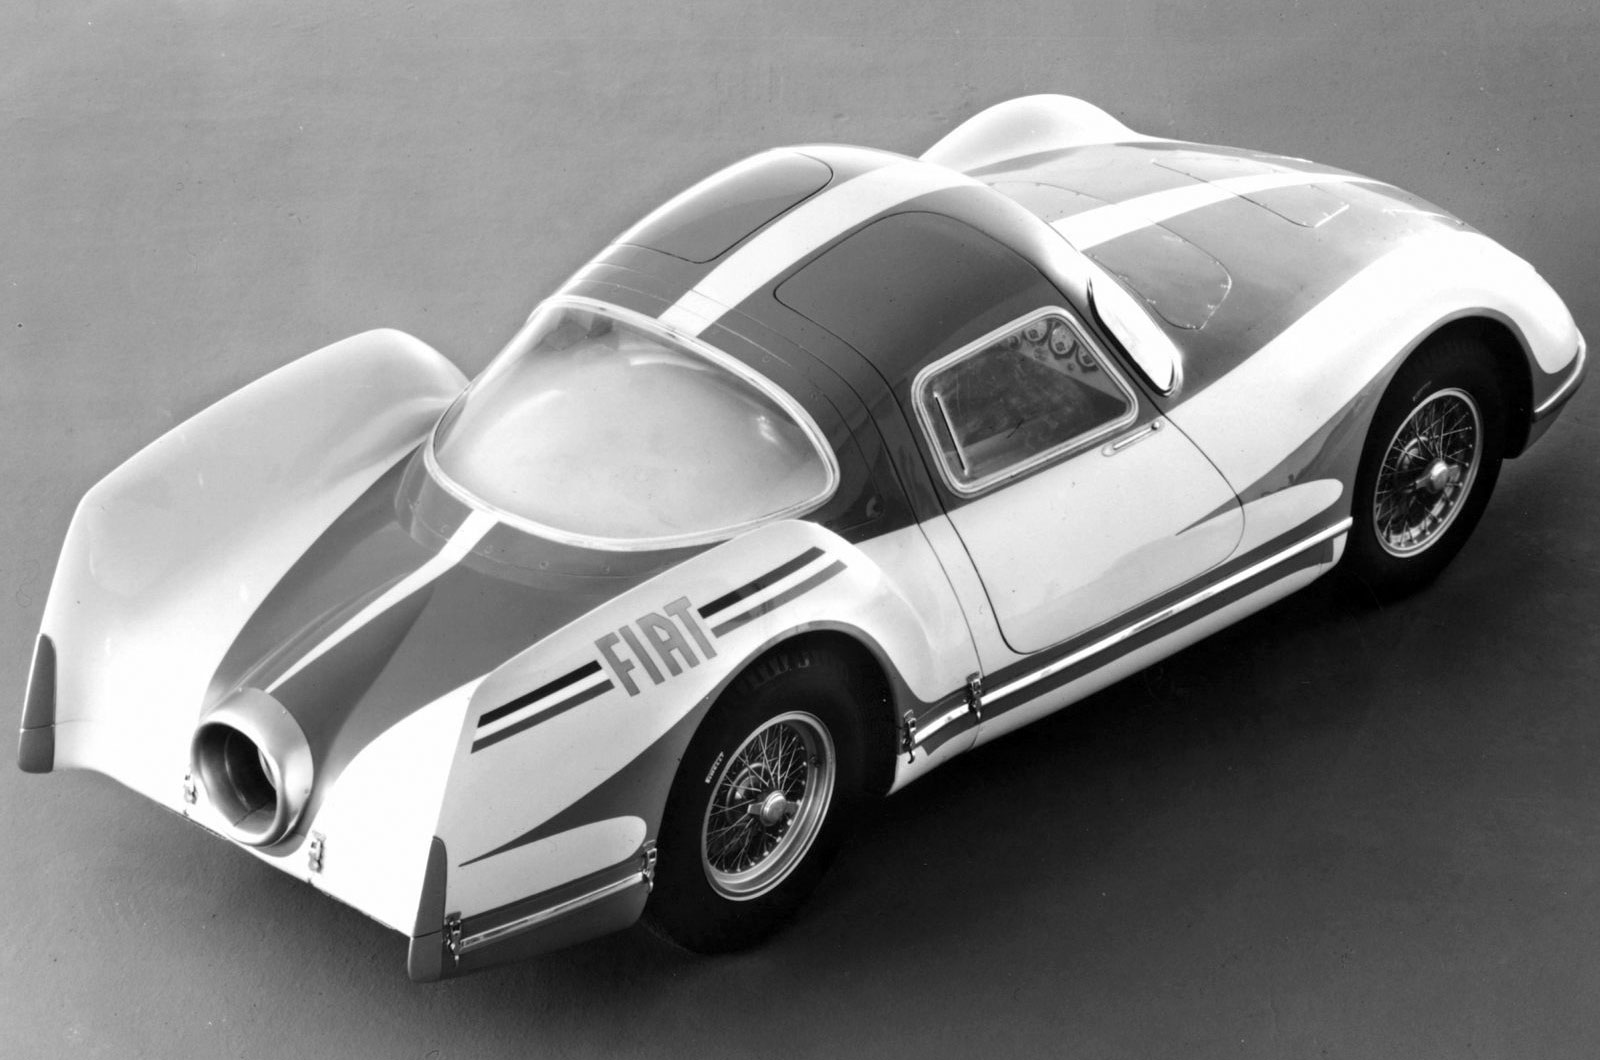 The greatest crazy concept cars ever made